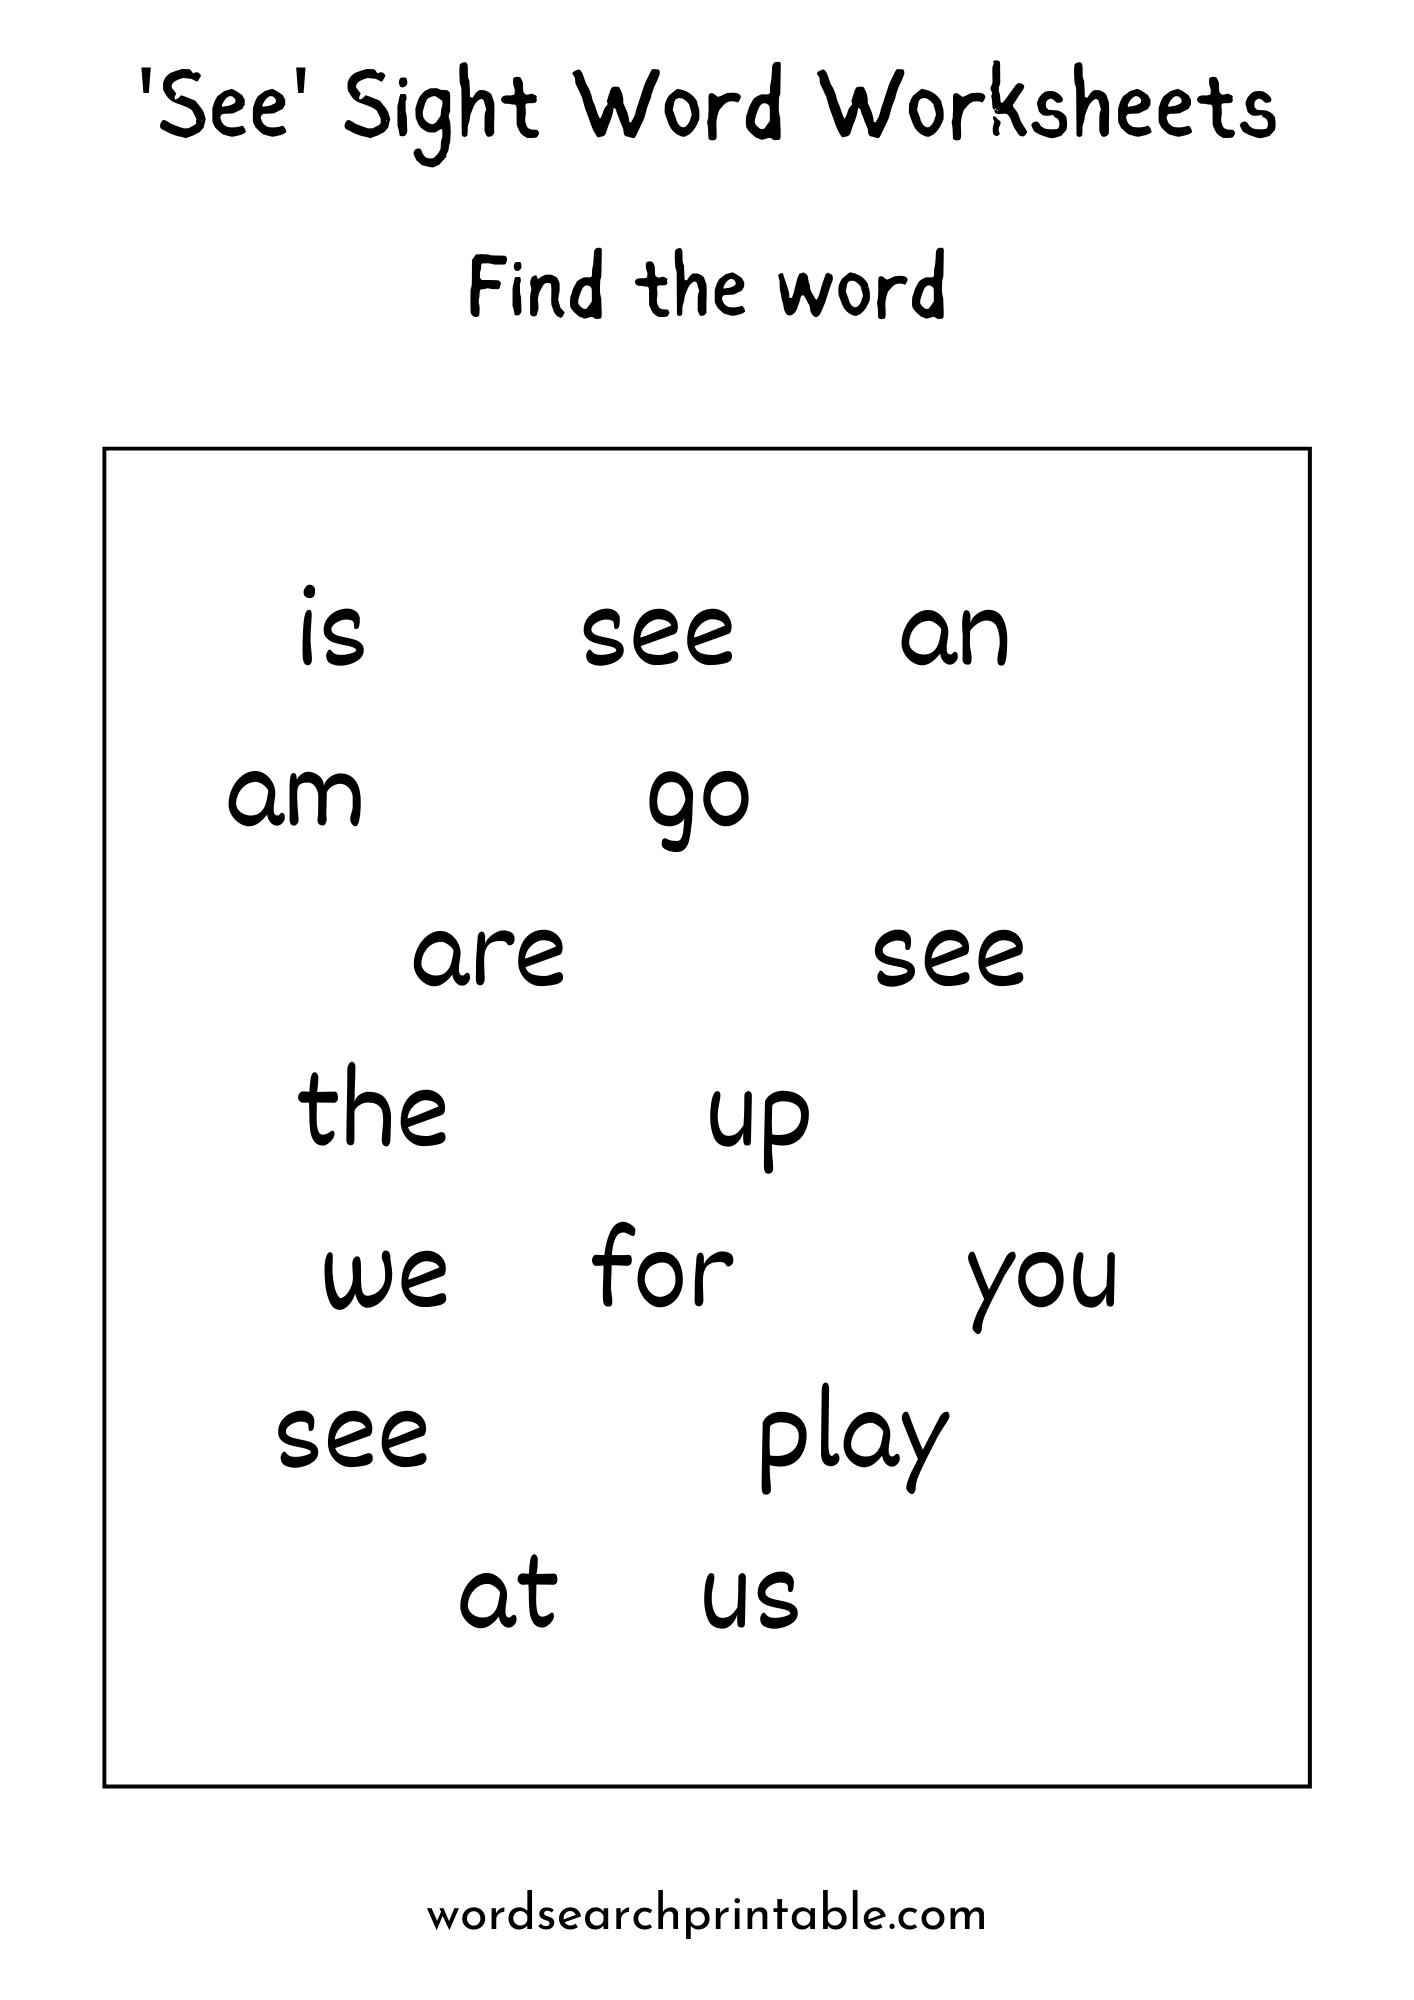 In this Find the word See worksheet, your child will use observational skills to find the word. To finish this task, let your child find the word "See" and circle it with a pencil.